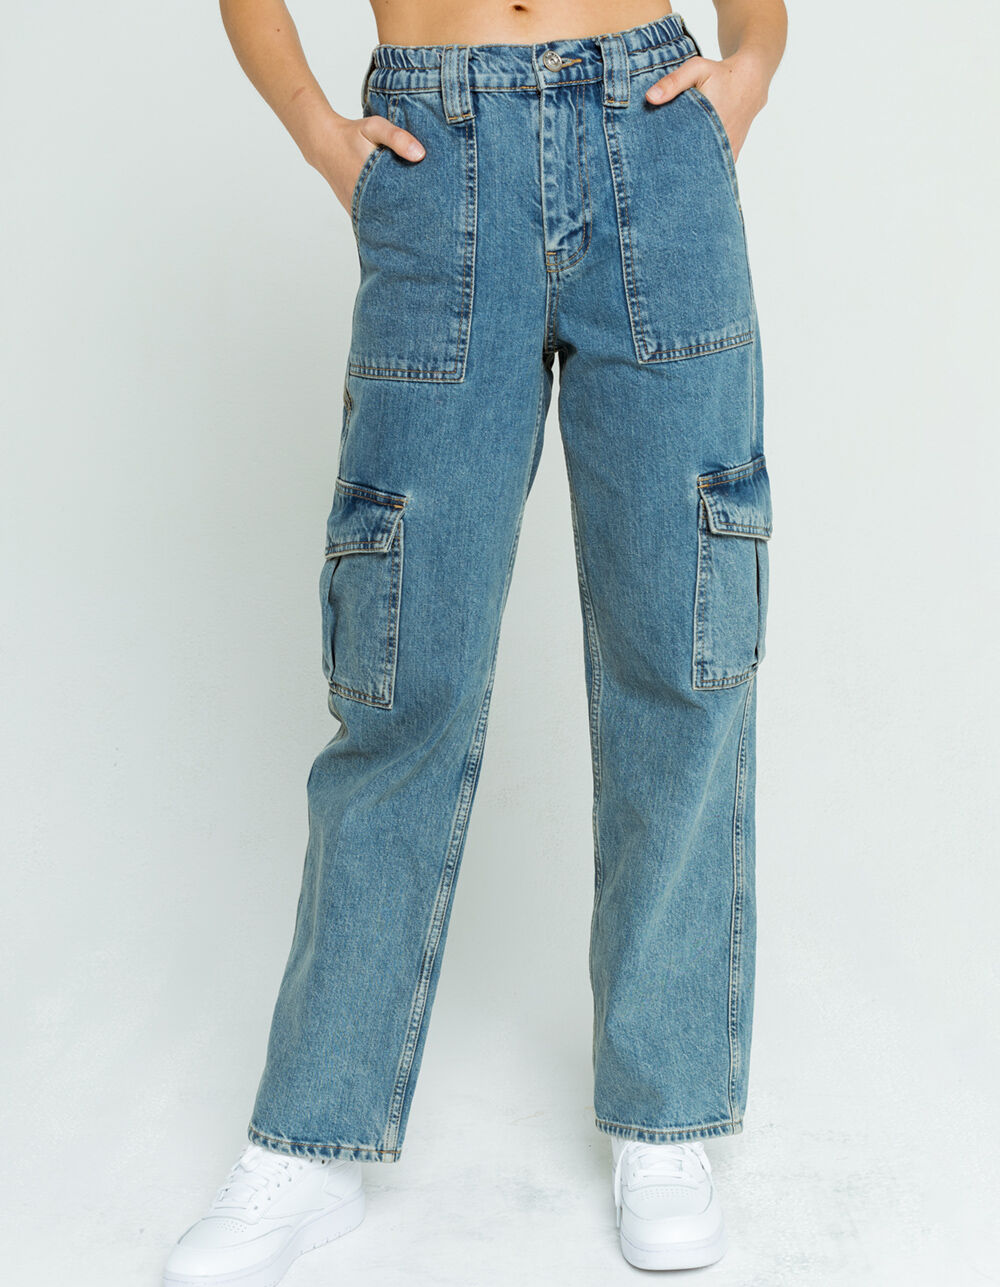 BDG Urban Outfitters Womens Jeans - VINTAGE |